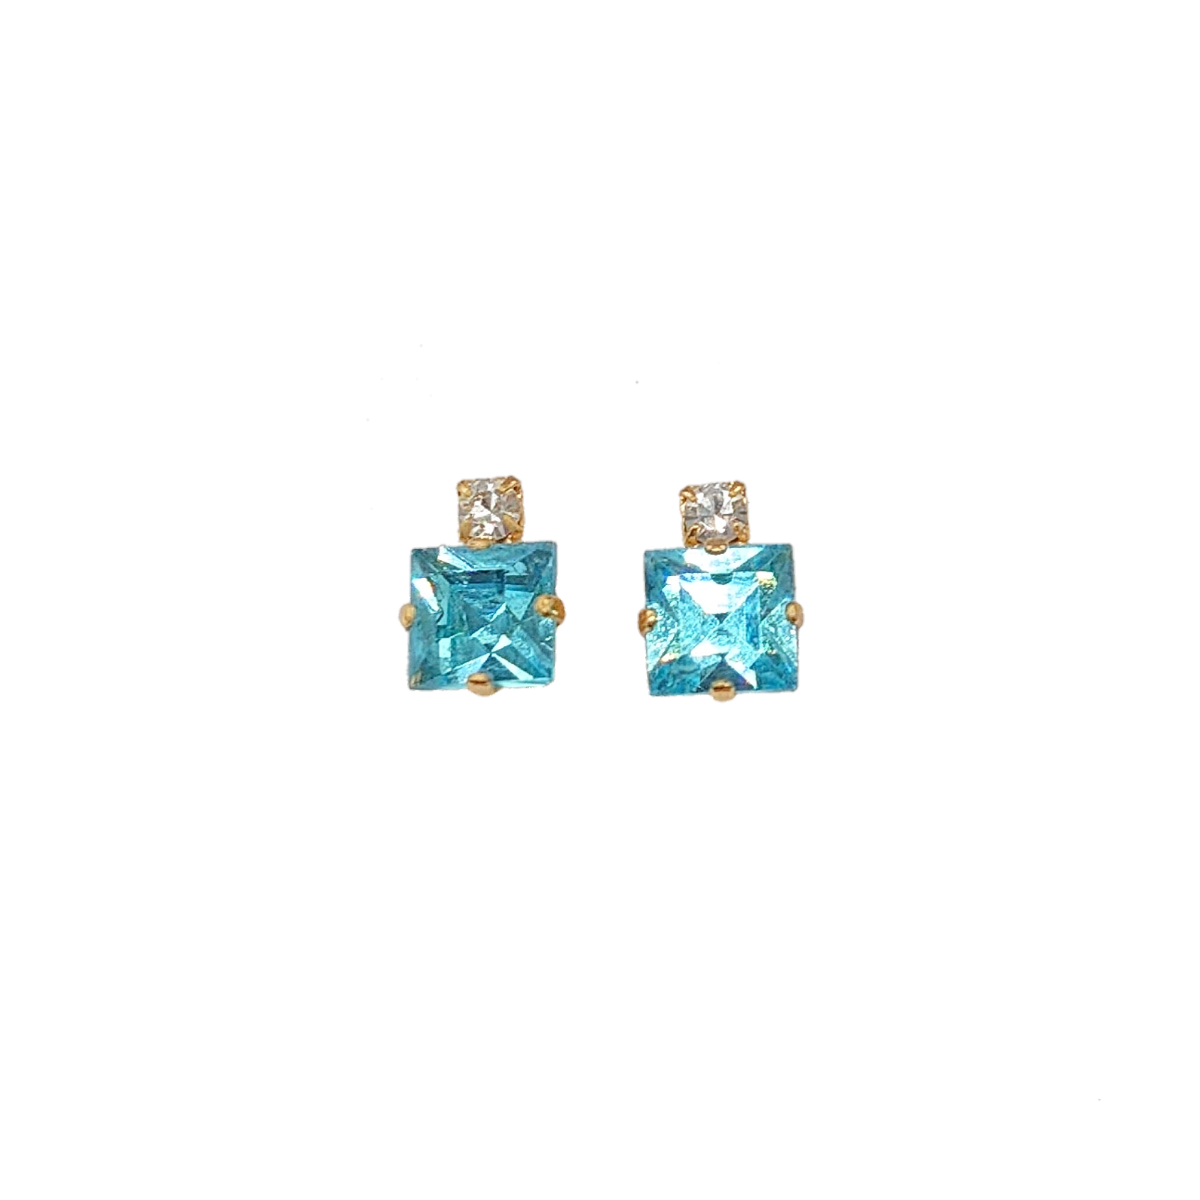 Small Swarovski Crystals Square Earrings With Gold Fittings